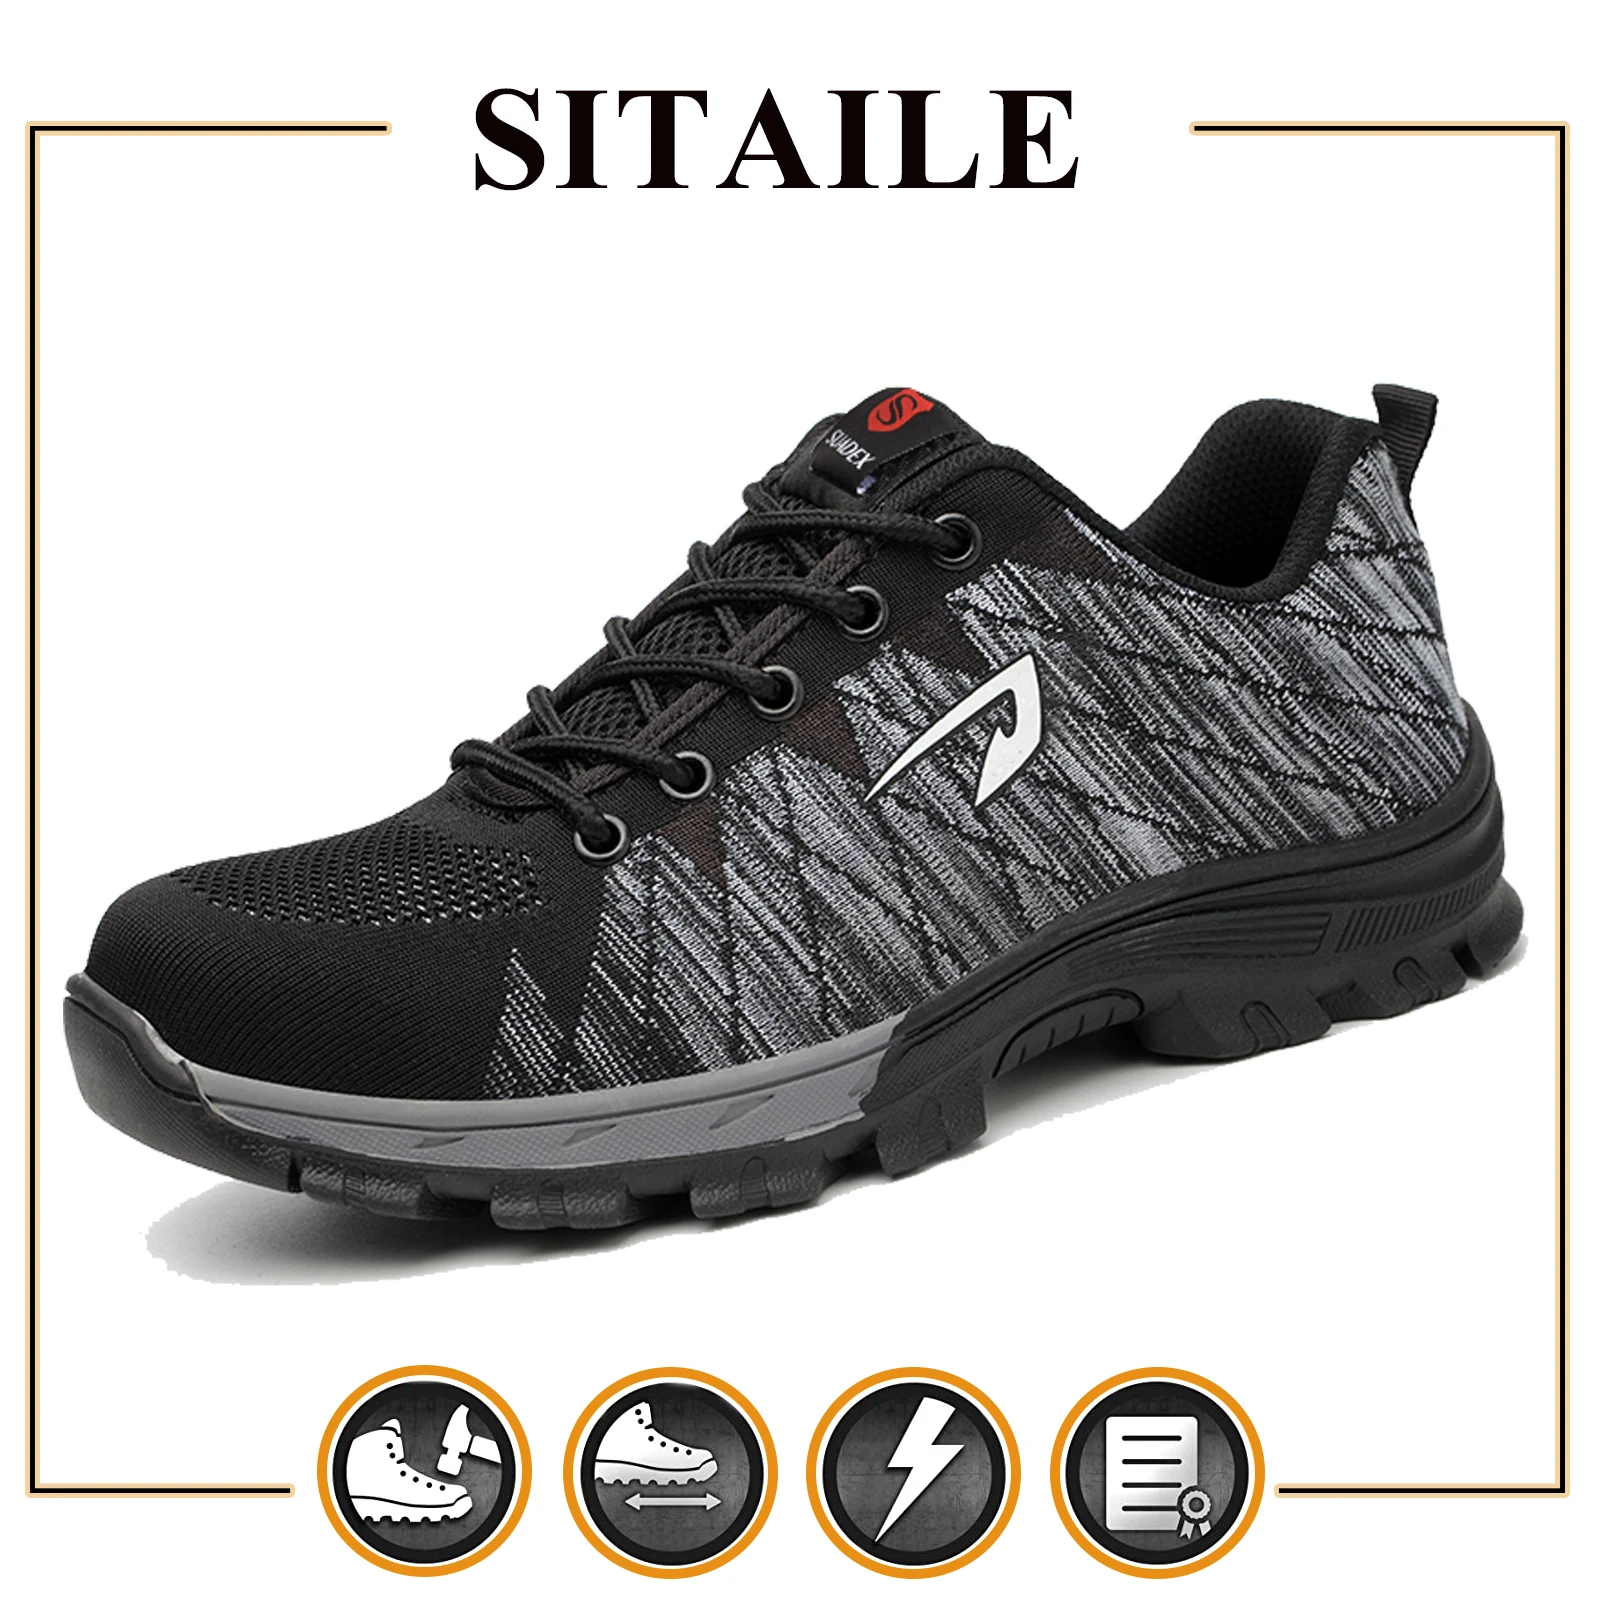 SITAILE Safety Steel Toe Shoes for Men and Women Breathable Lightweight Puncture Proof Work Construction Sneakers 